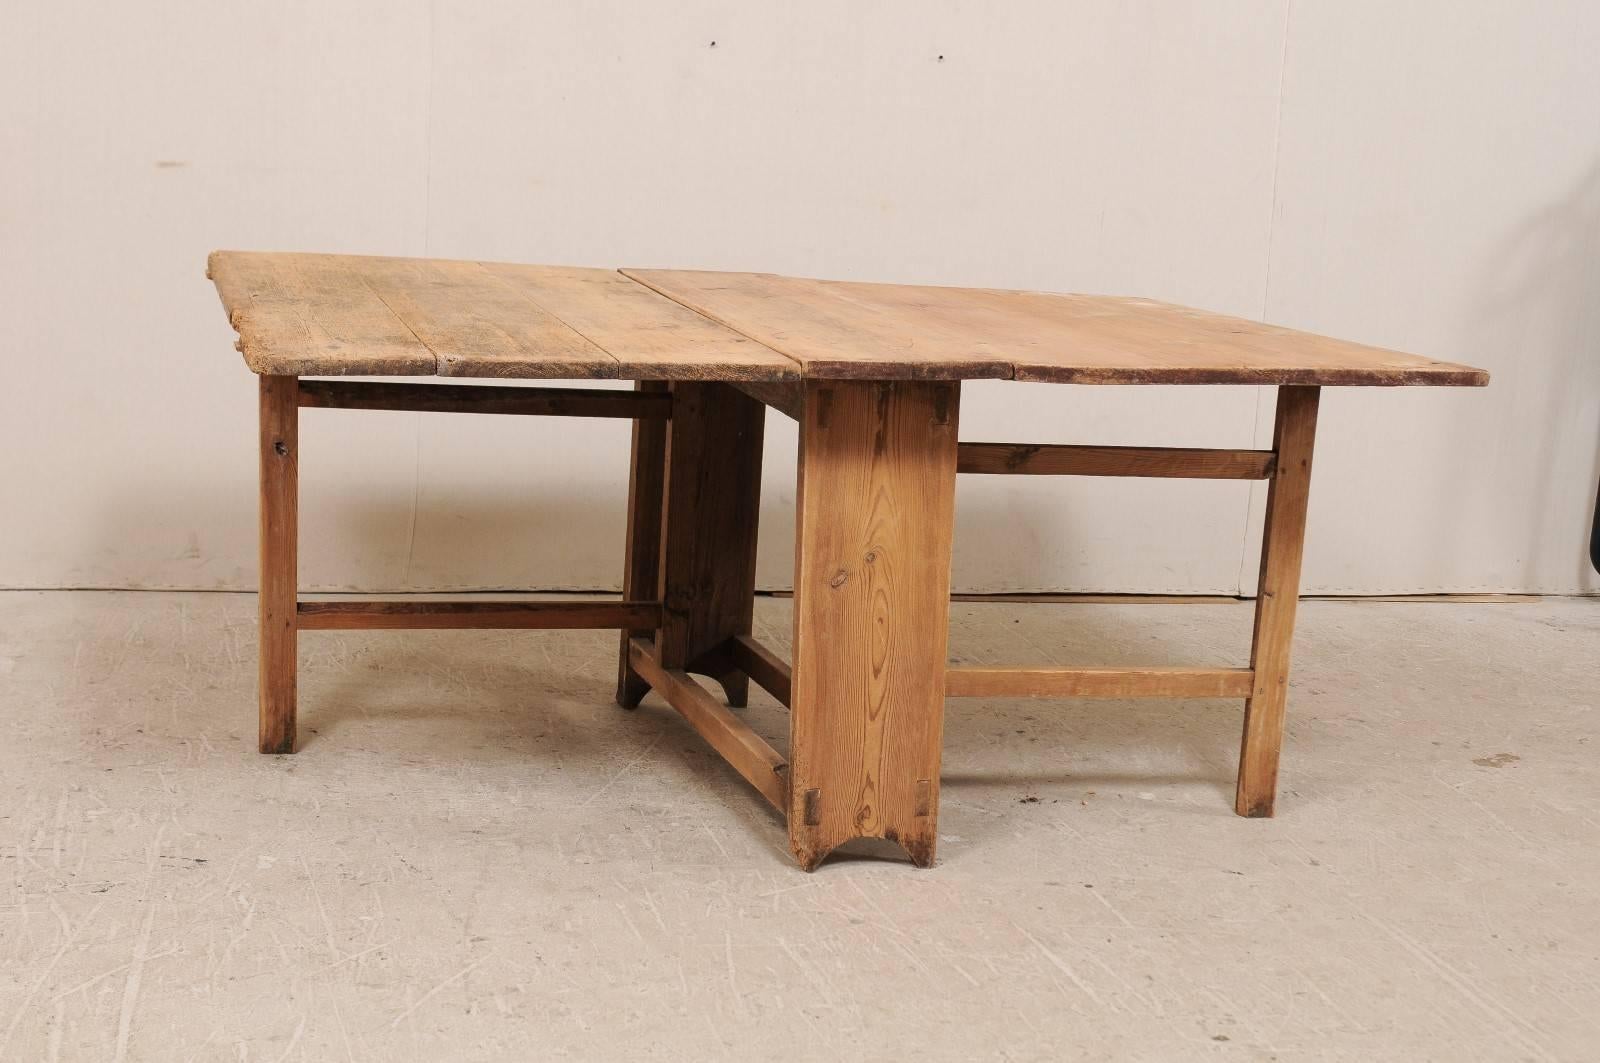 A Swedish early 19th century wood drop-leaf and gate-leg table. This antique Swedish table features two drop leaf sides that will extend the table to 66.5